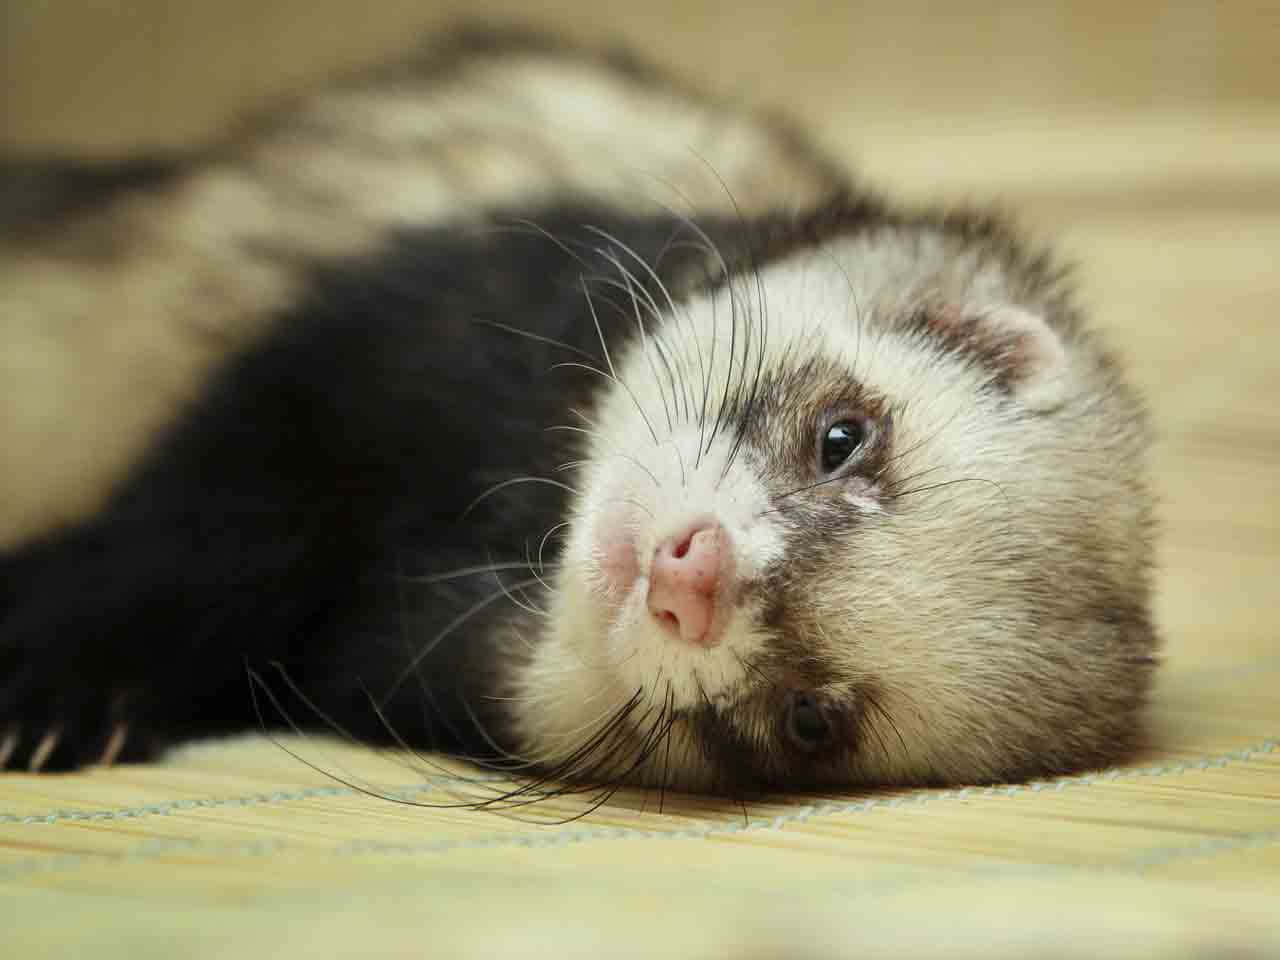 Ferrets are more than just small, cuddly pets - they're athletes at heart